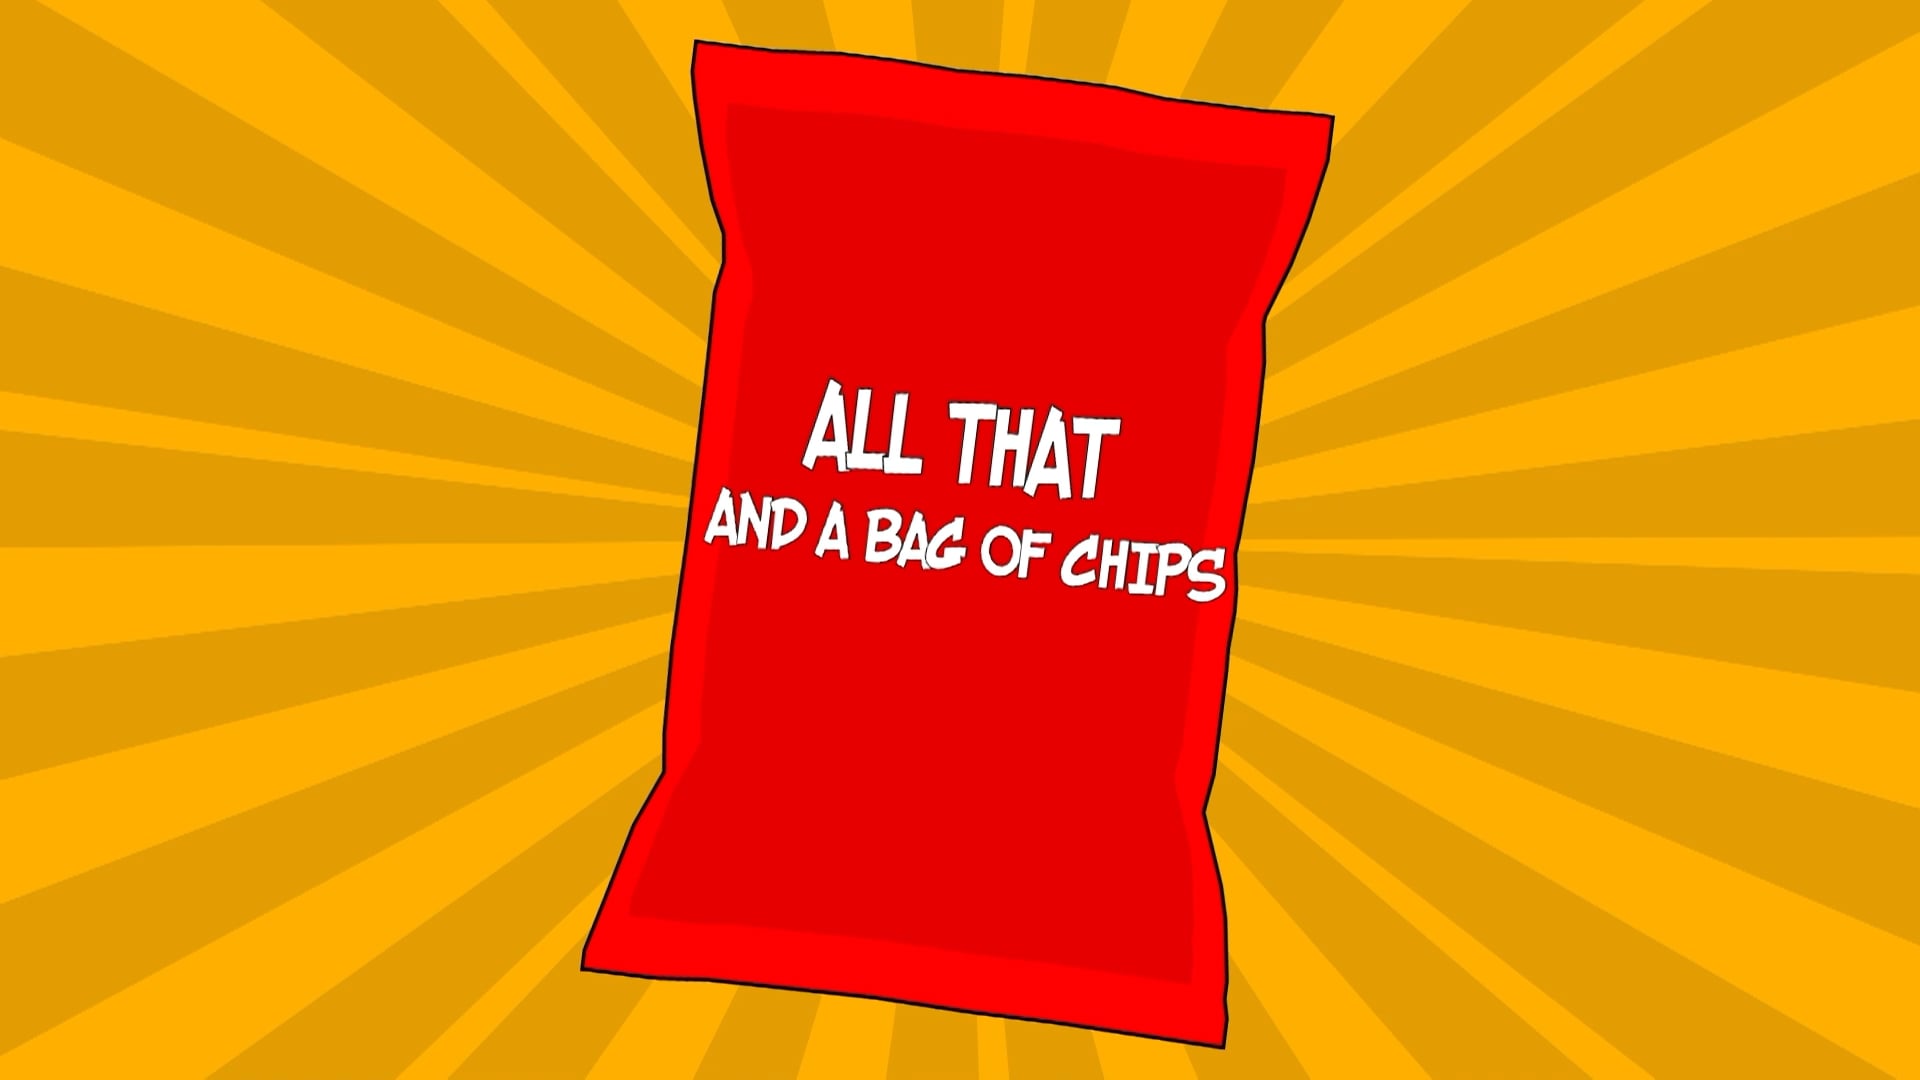 All That and a Bag of Chips S6 Epi 1